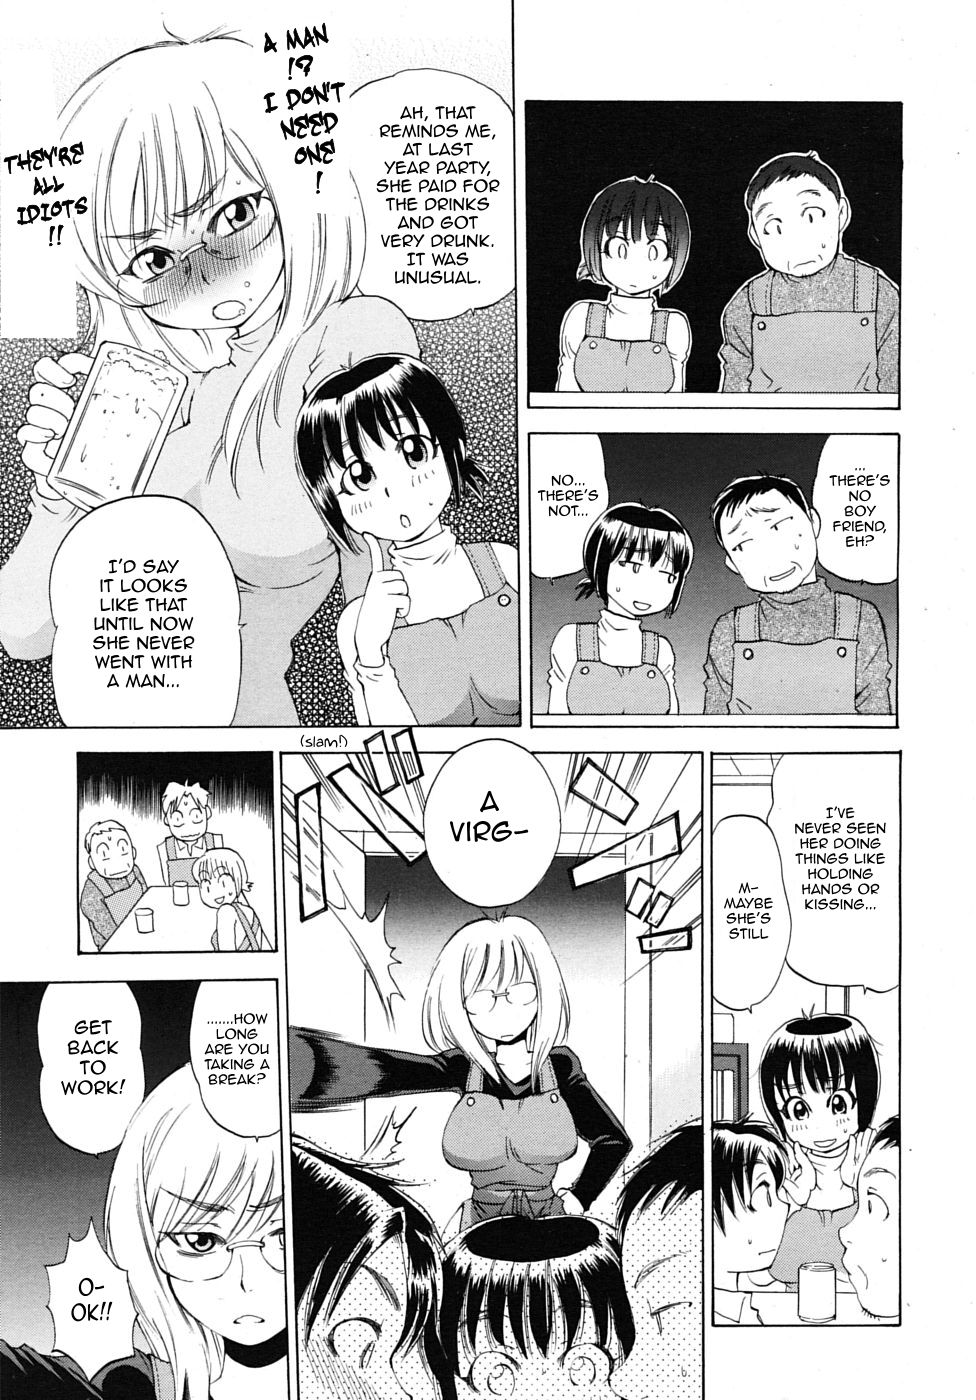 [Sabusuka] Miss Sonomura and the education of the newcomer [English][Sling] 